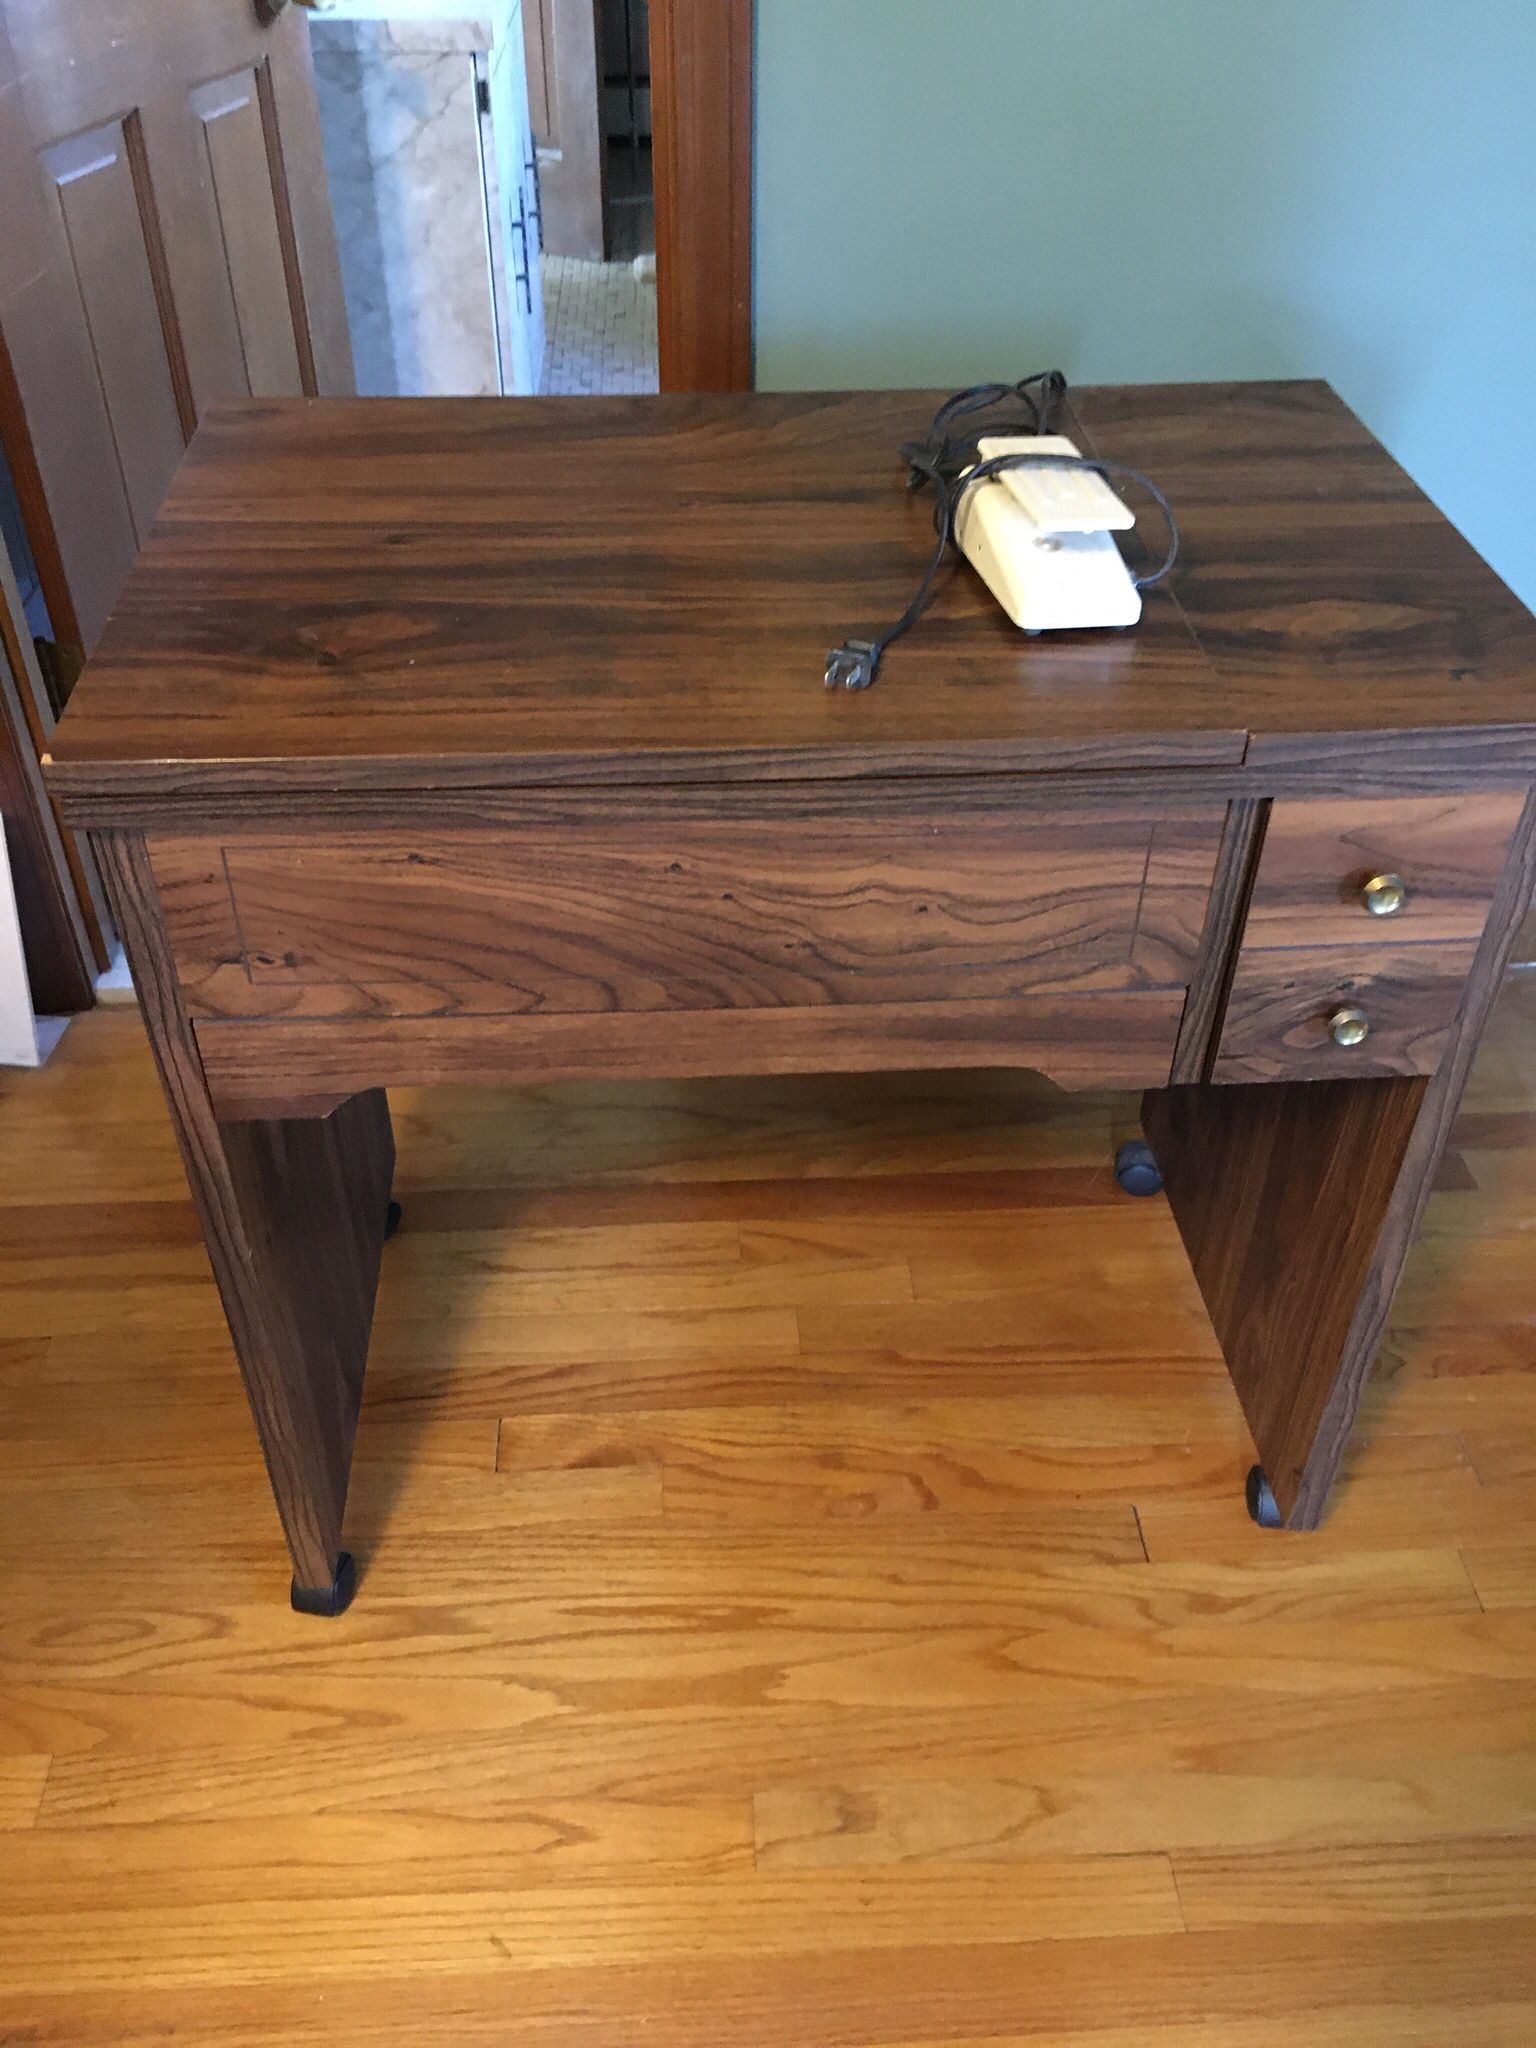 Sewing Machine With Cabinet